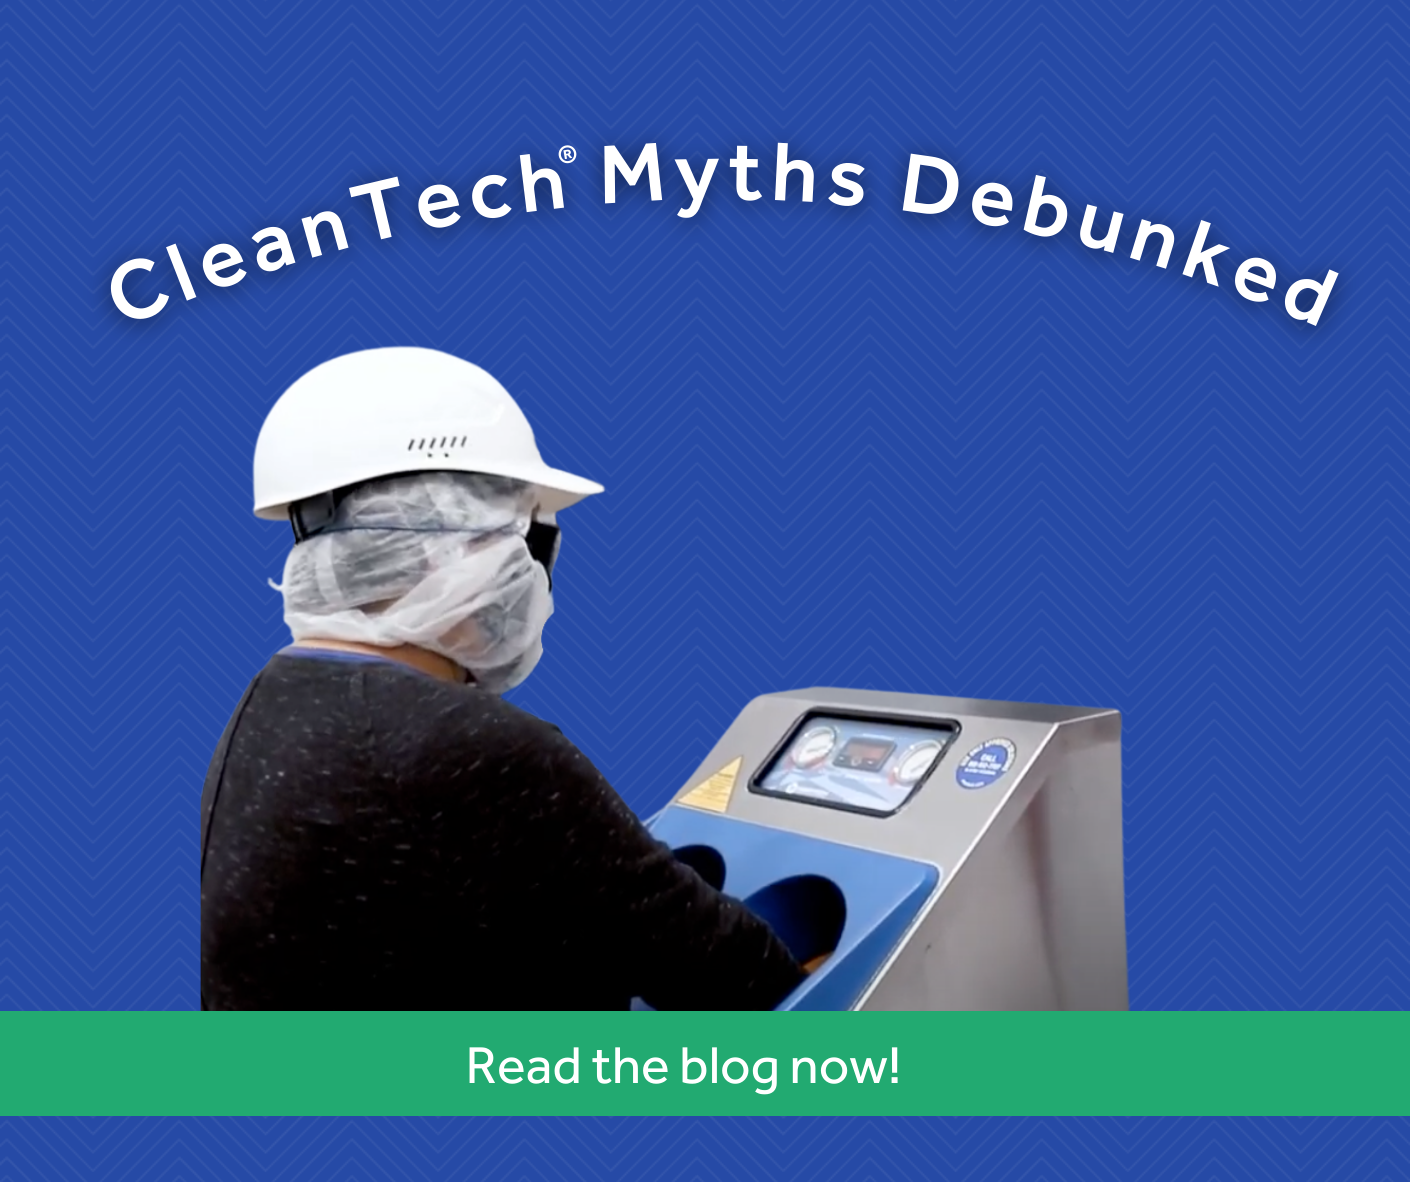 CleanTech® Automated Handwashing Station Myths Debunked